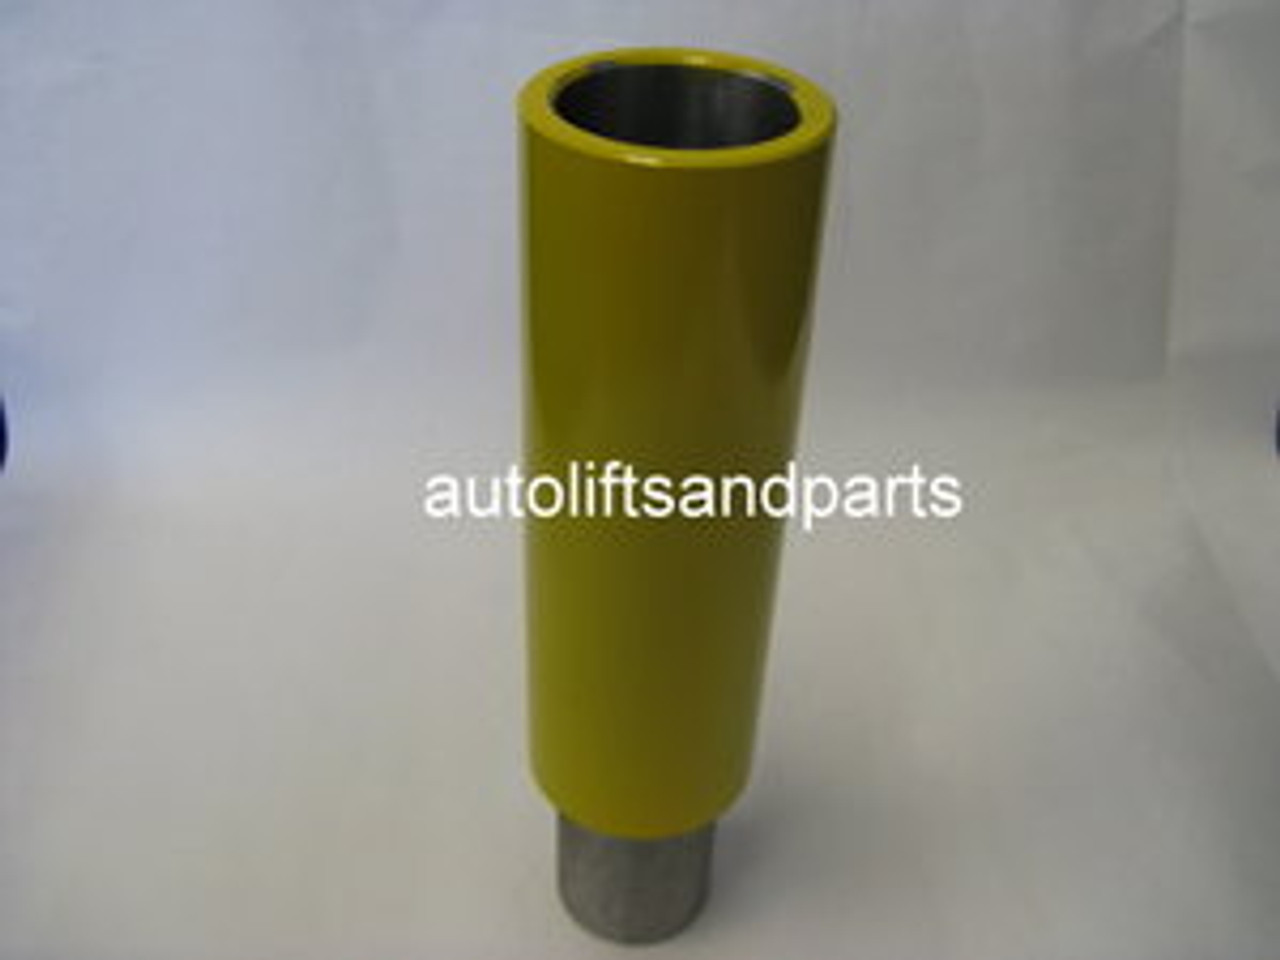 Stack Adapter / Height Adapter 1-1/2" Dia. x 6"